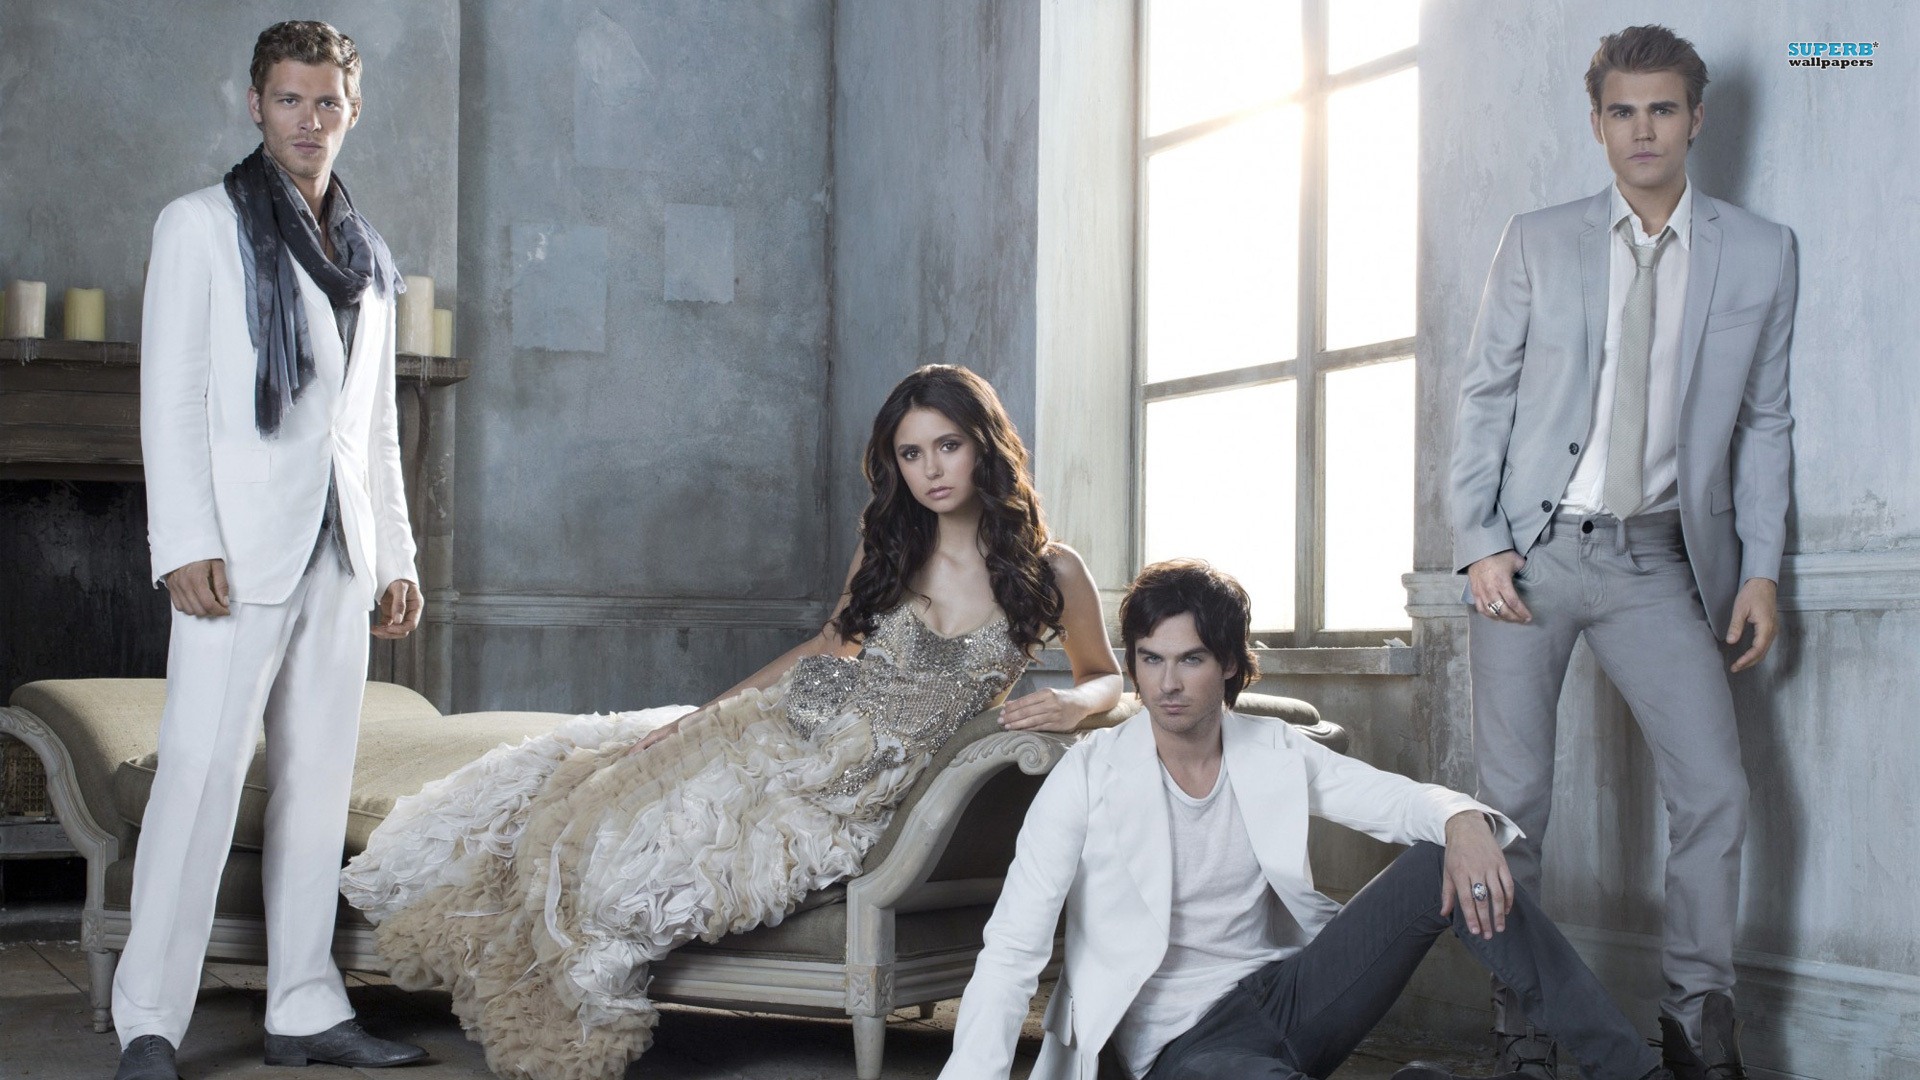 The Vampire Diaries wallpapers HD #8 - 1920x1080